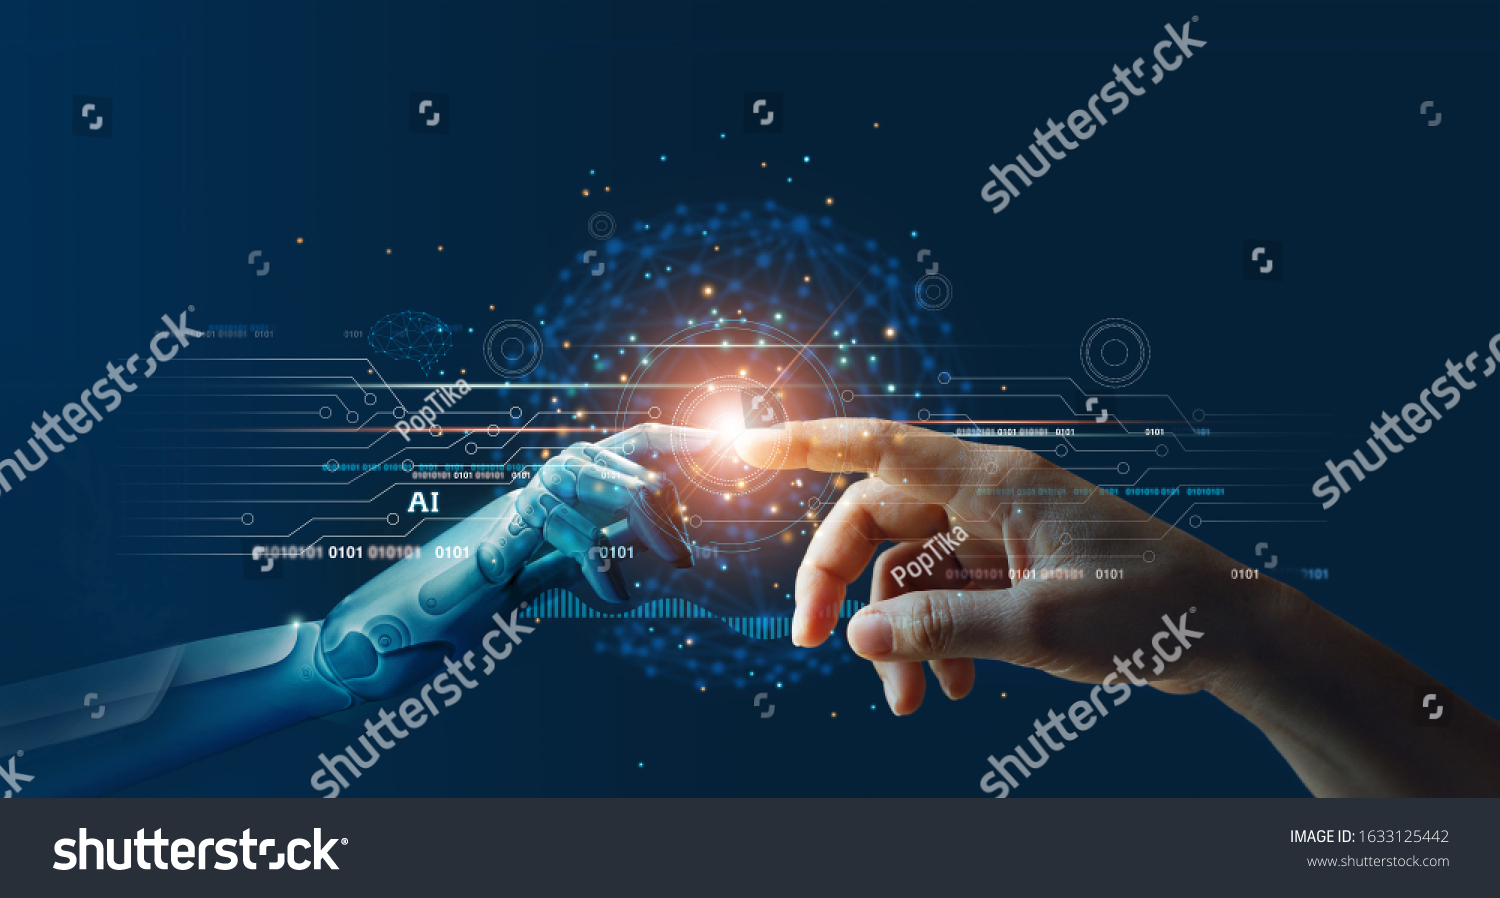 AI, Machine learning, Hands of robot and human touching on big data network connection background, Science and artificial intelligence technology, innovation and futuristic.
 #1633125442